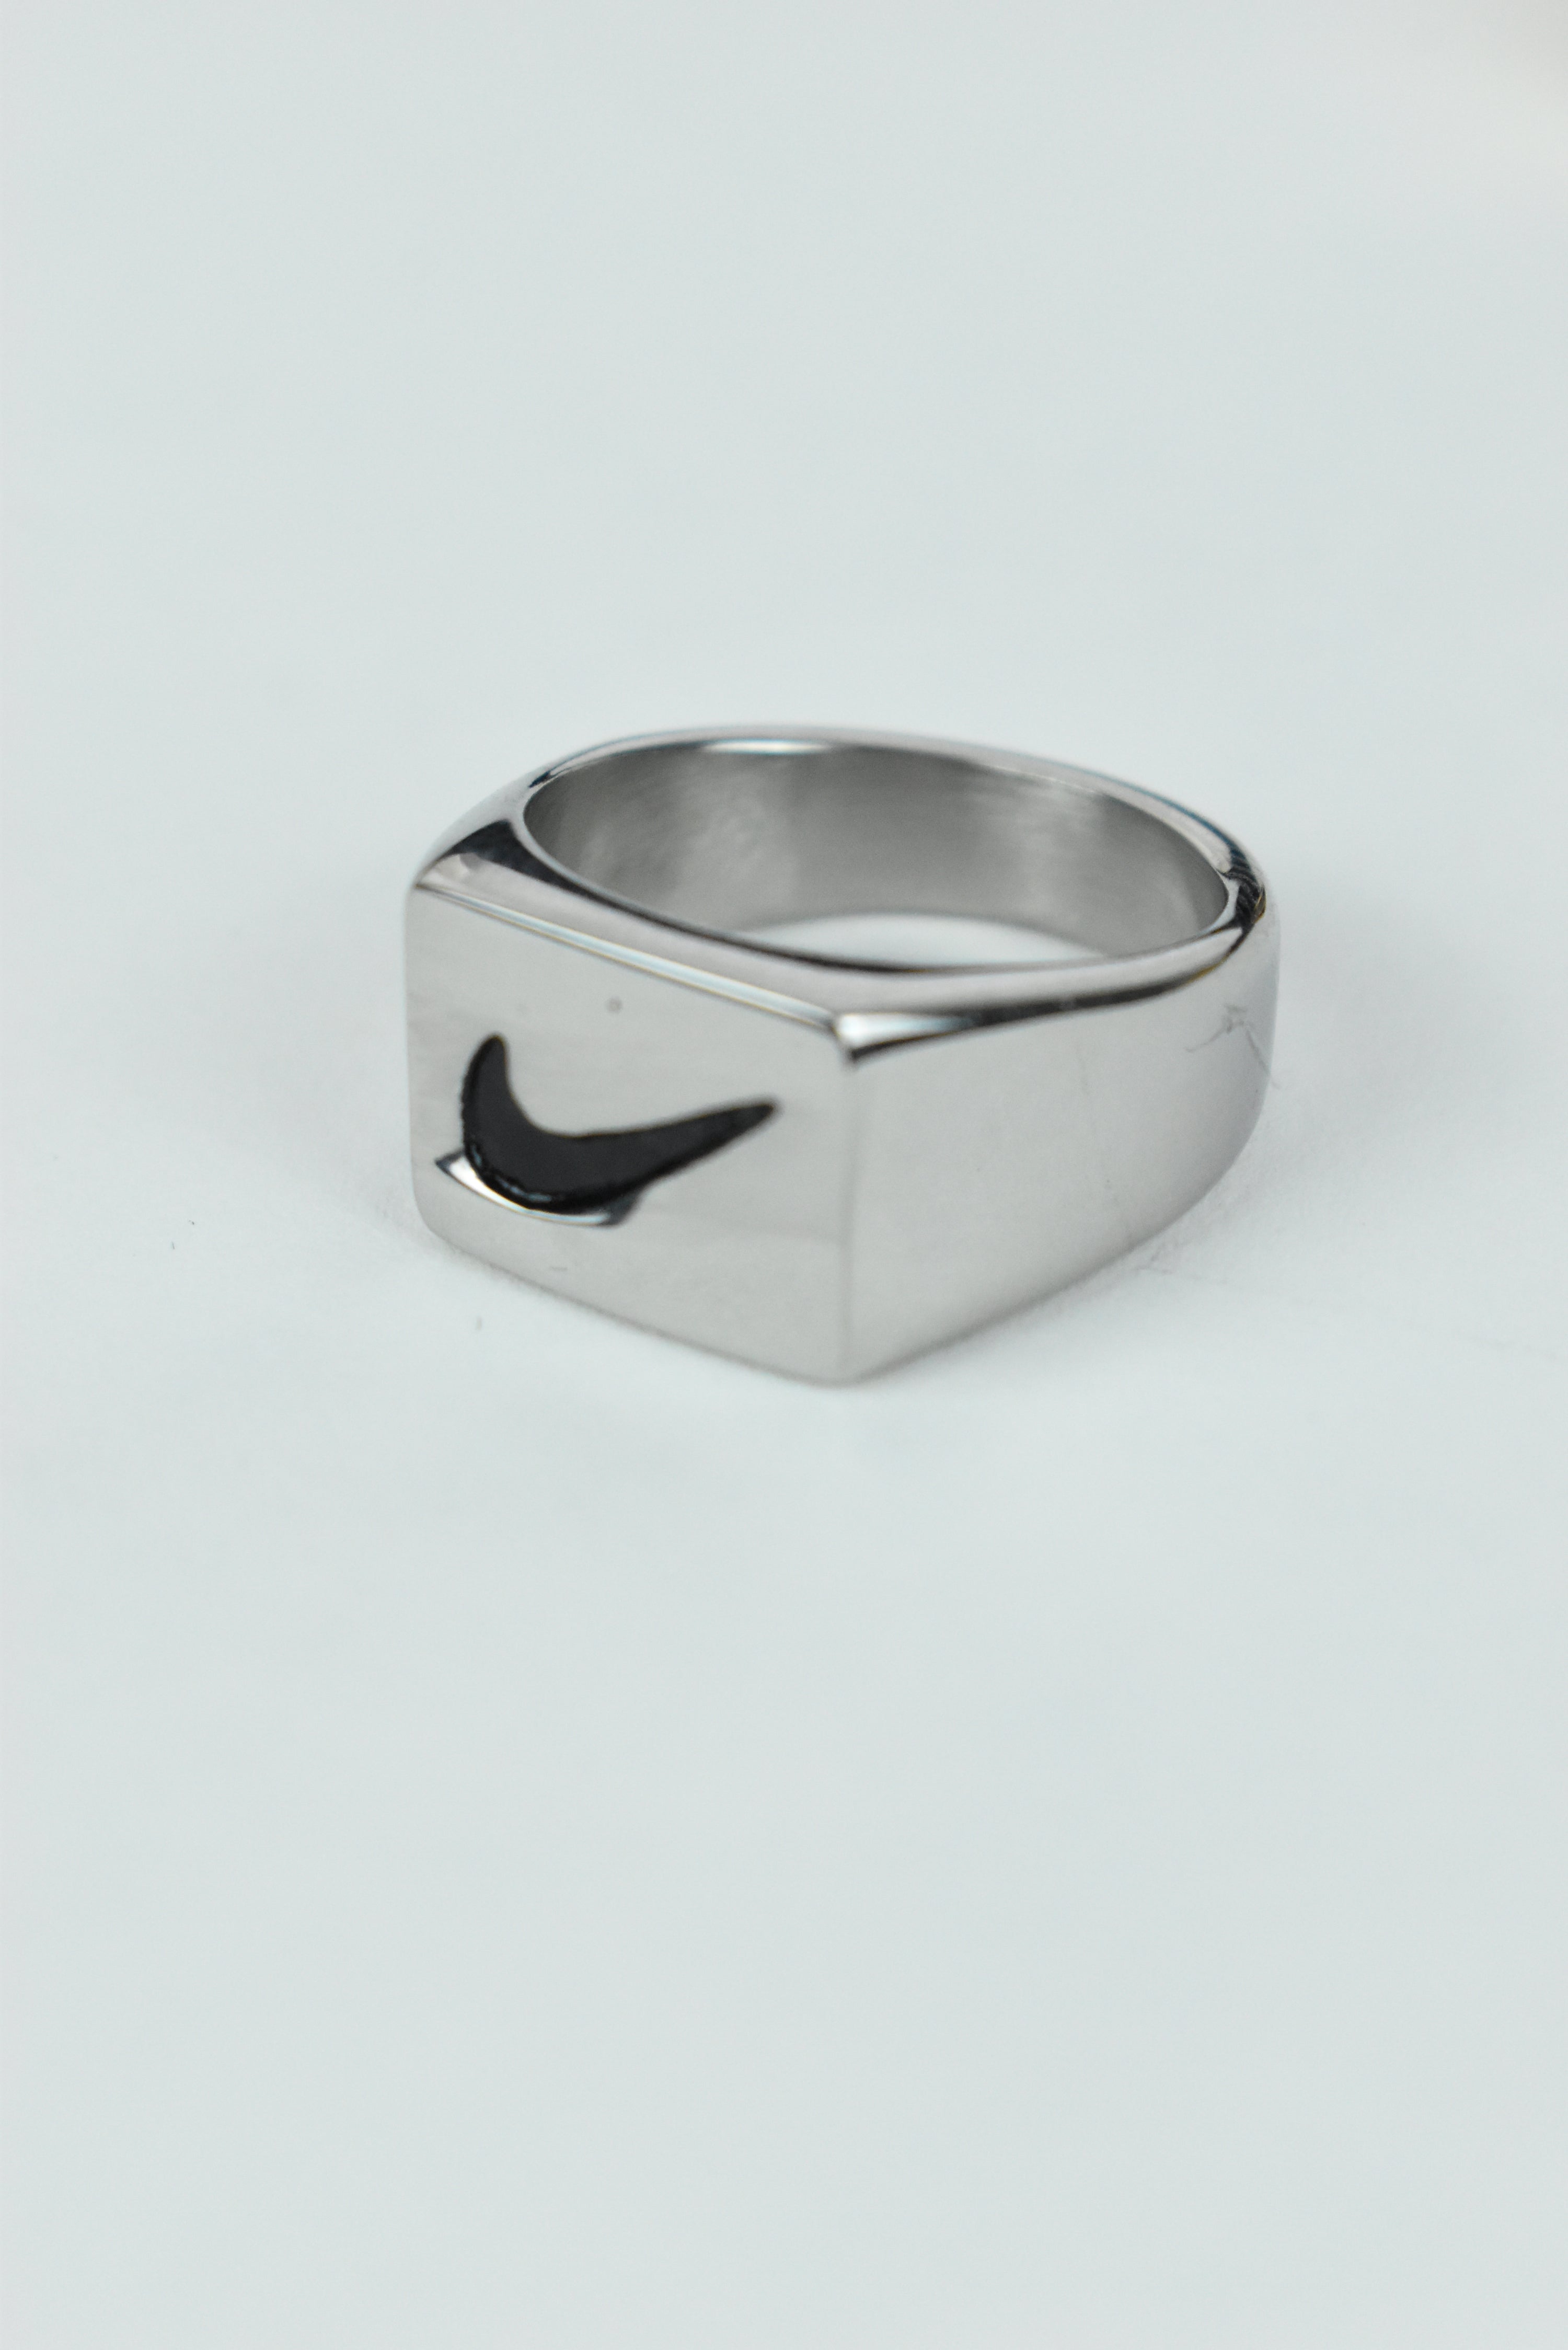 New Nike Swoosh Square Ring Bootleg Silver/Gold